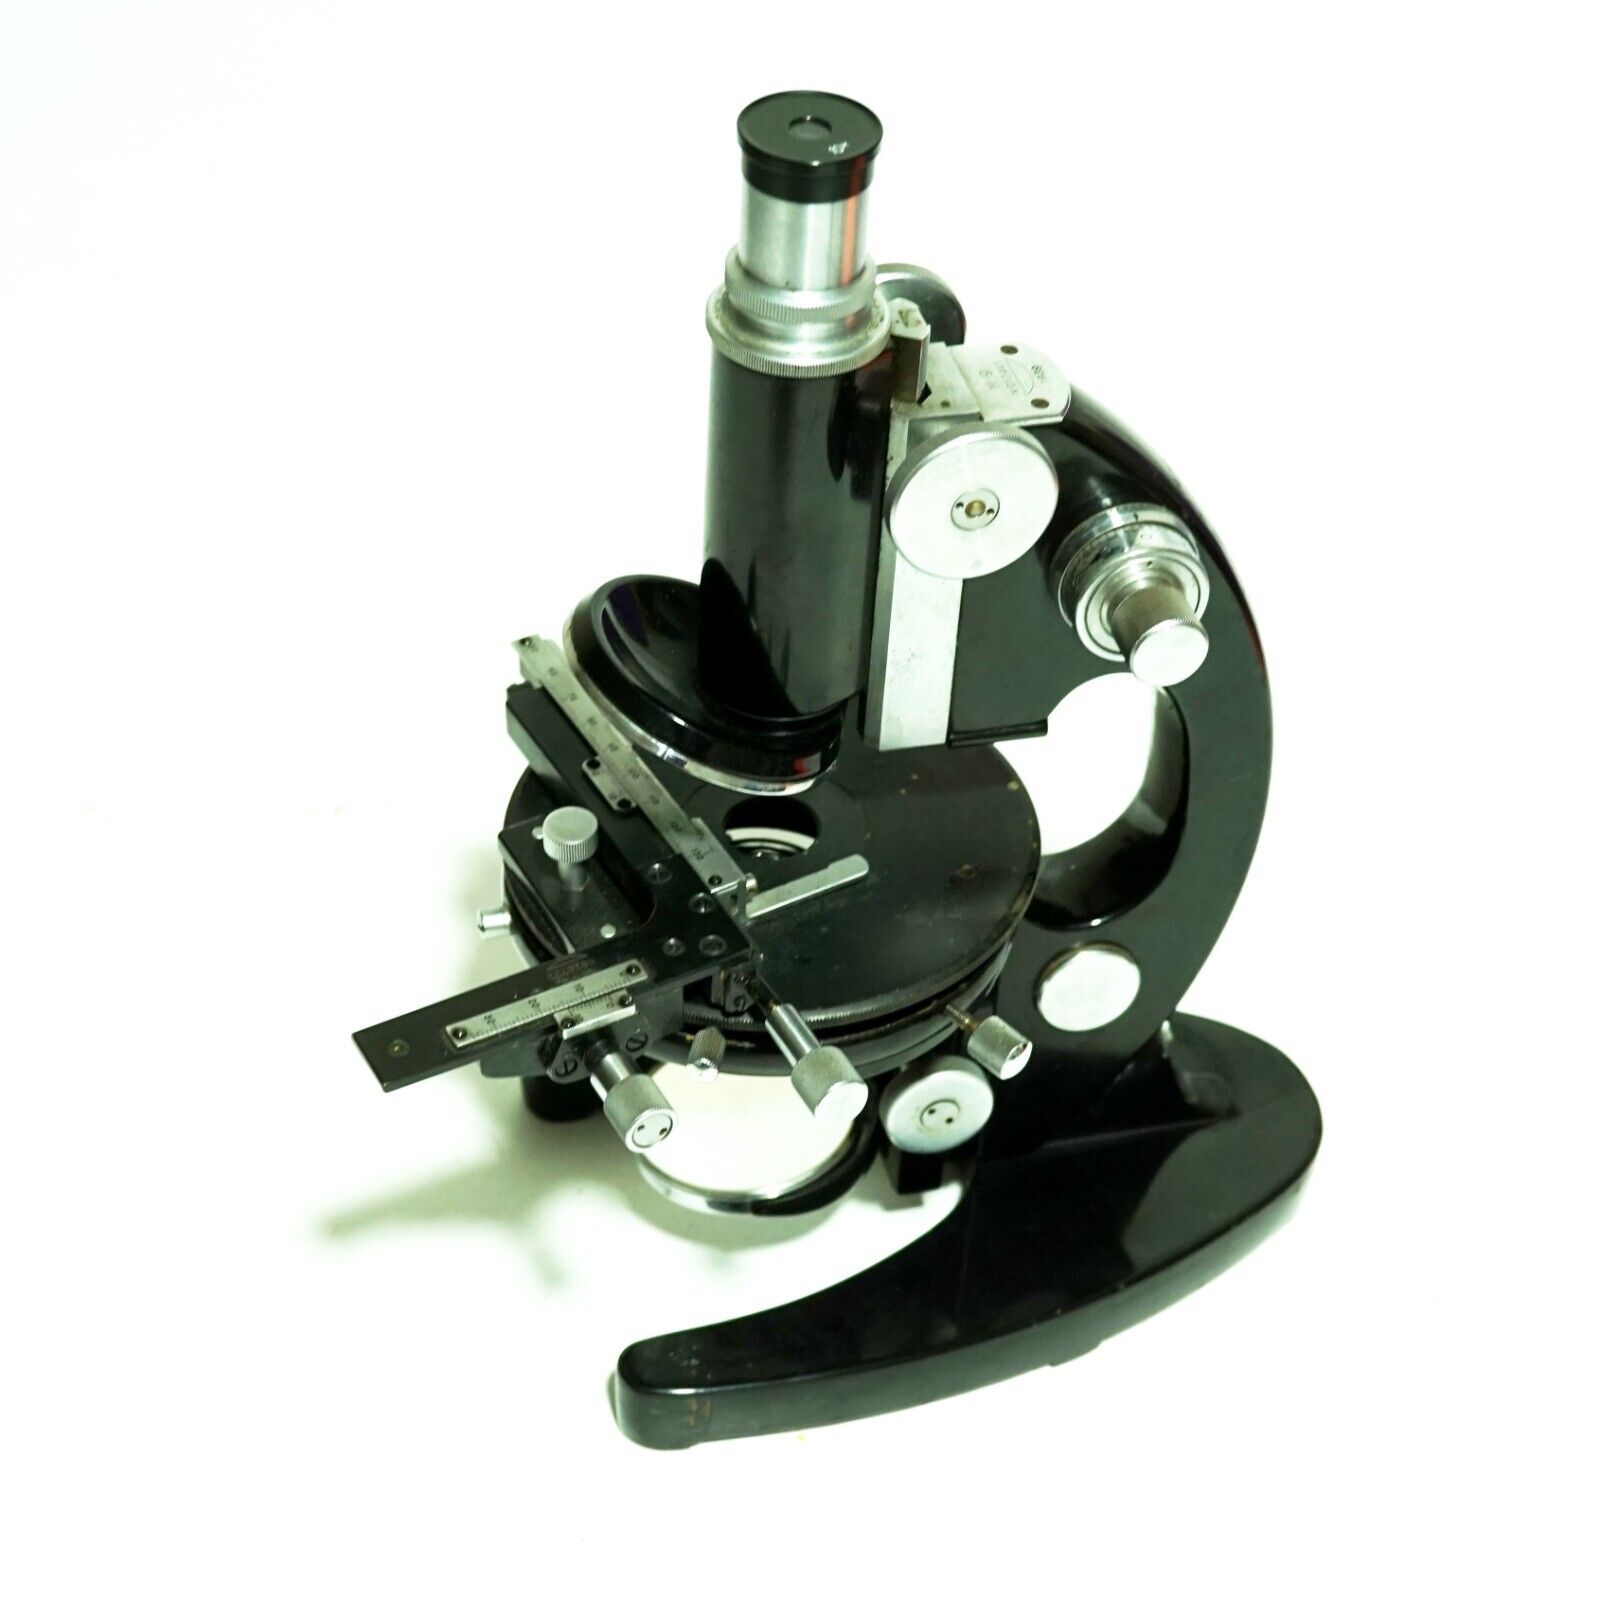 EARLY Vintage 1939 Rare soviet biological microscope glass M-9